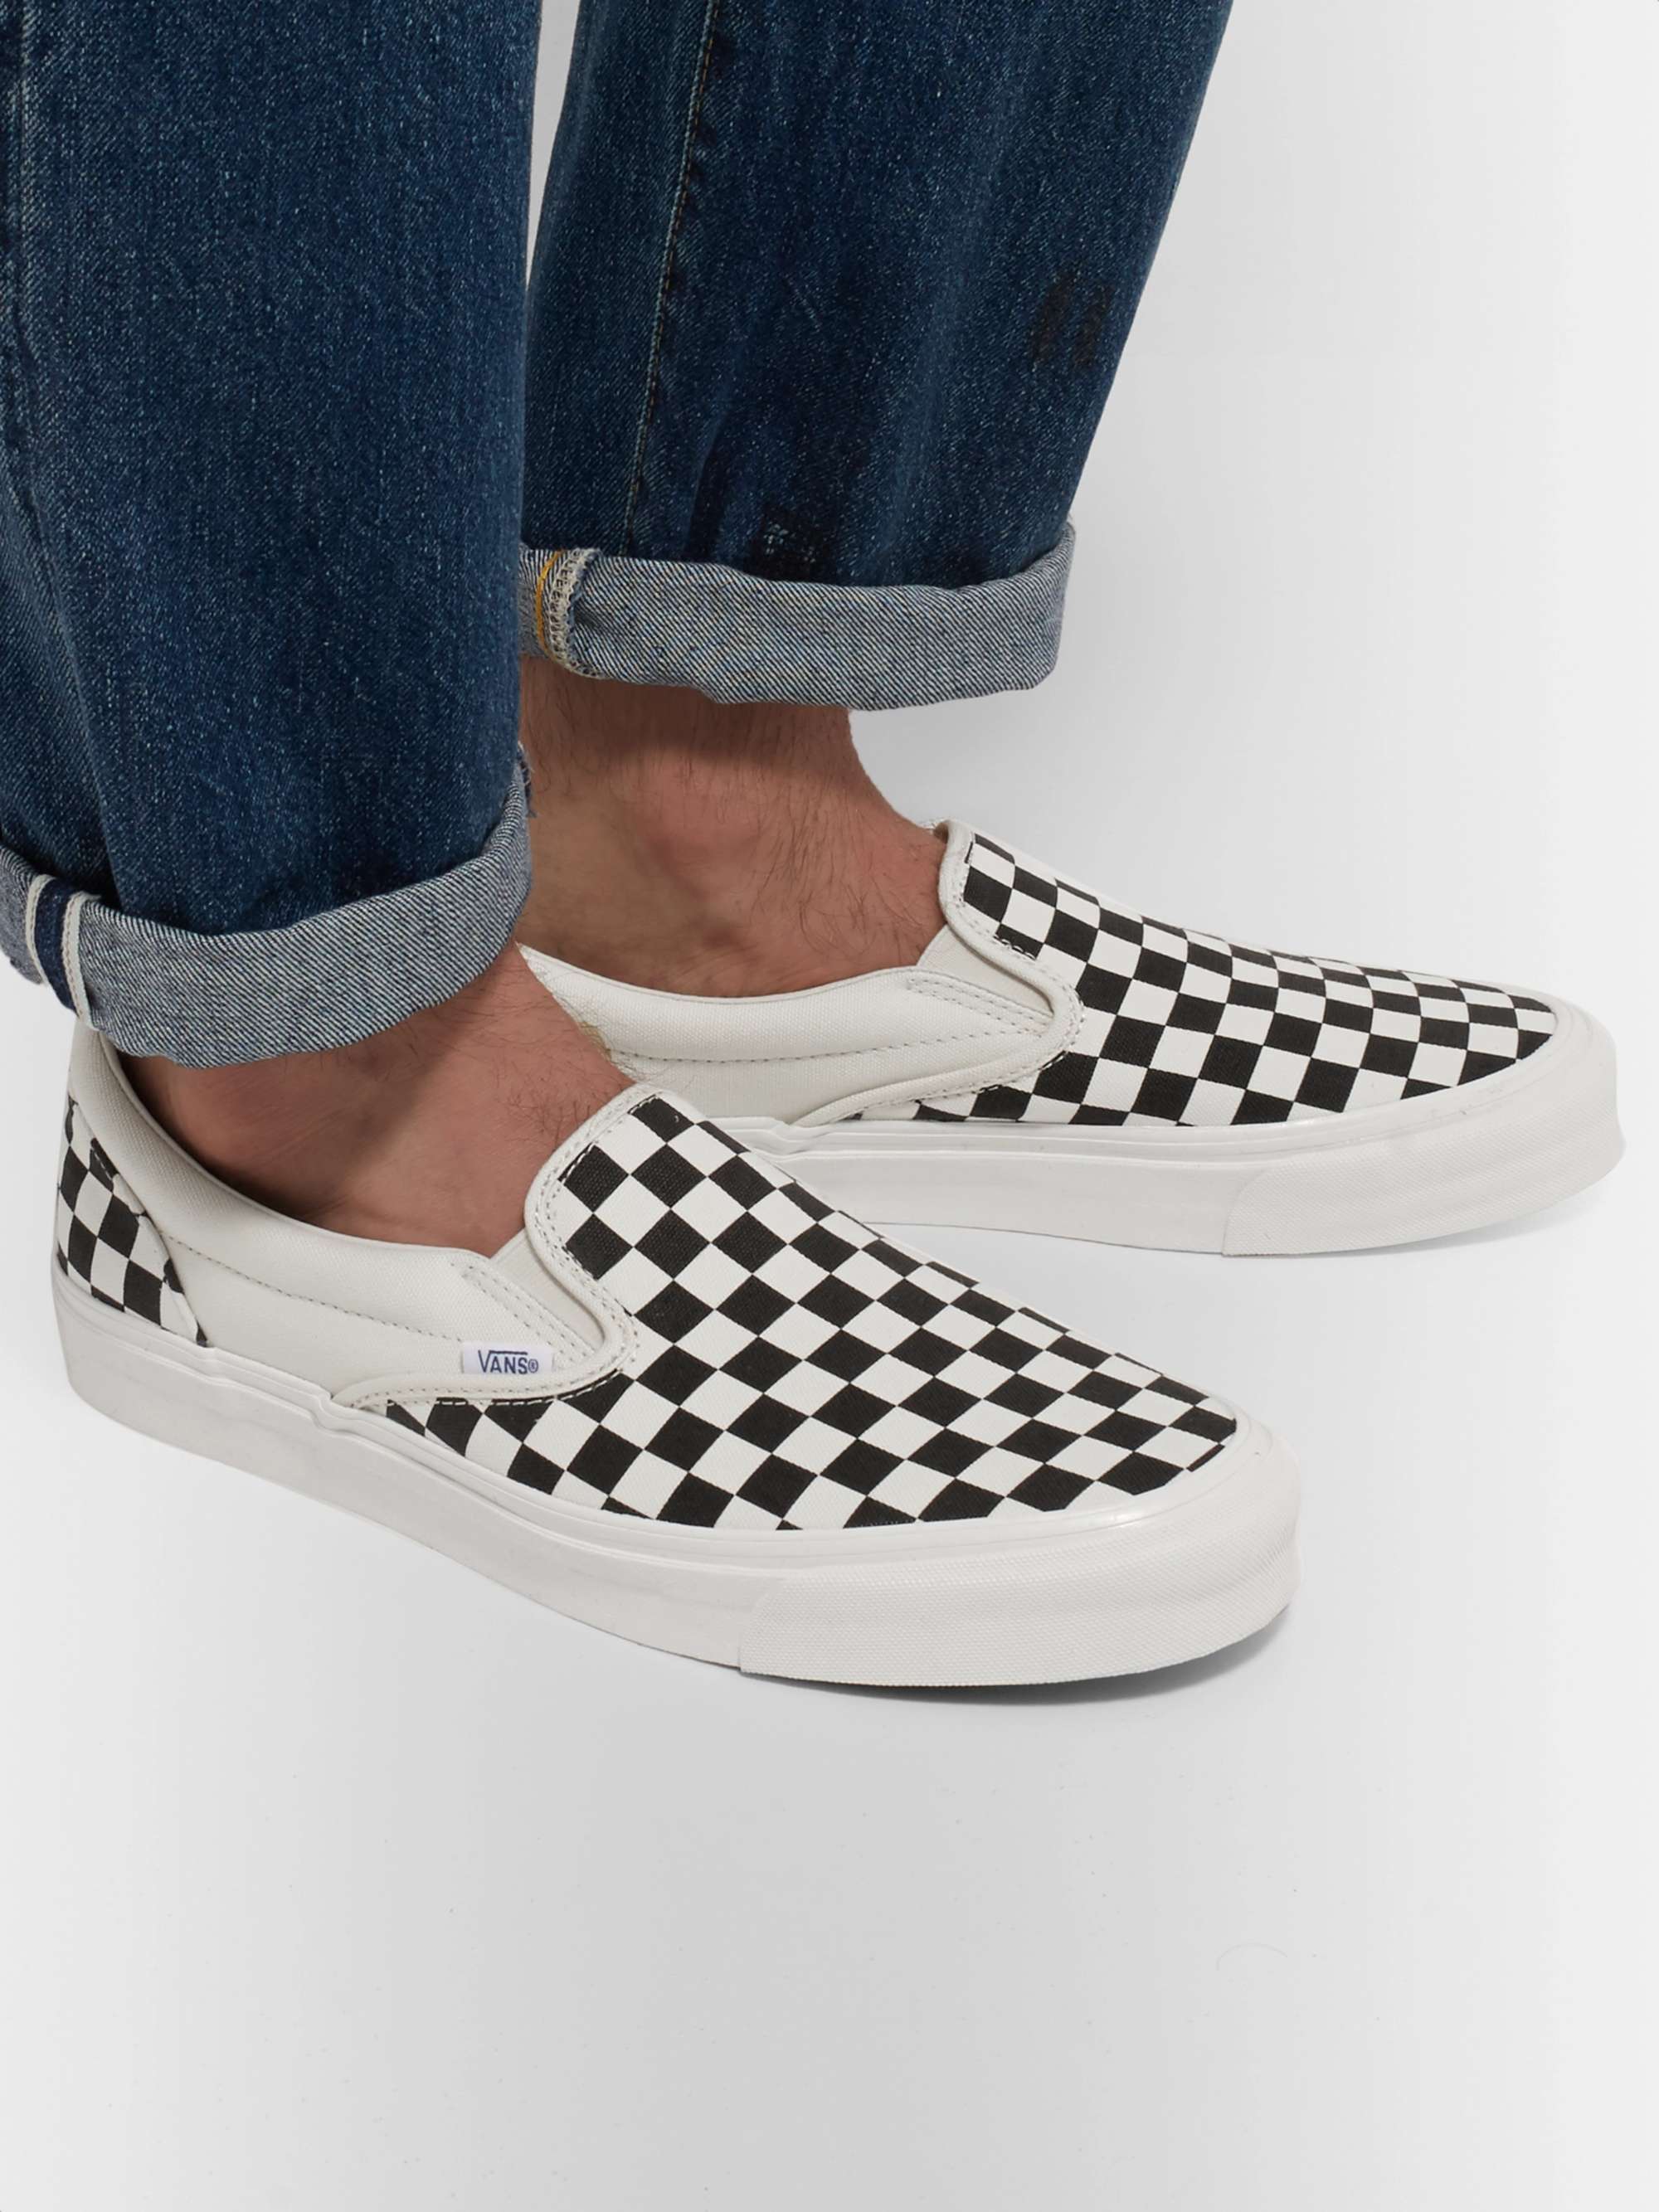 VANS OG Classic LX Checkerboard Canvas Slip-On Sneakers